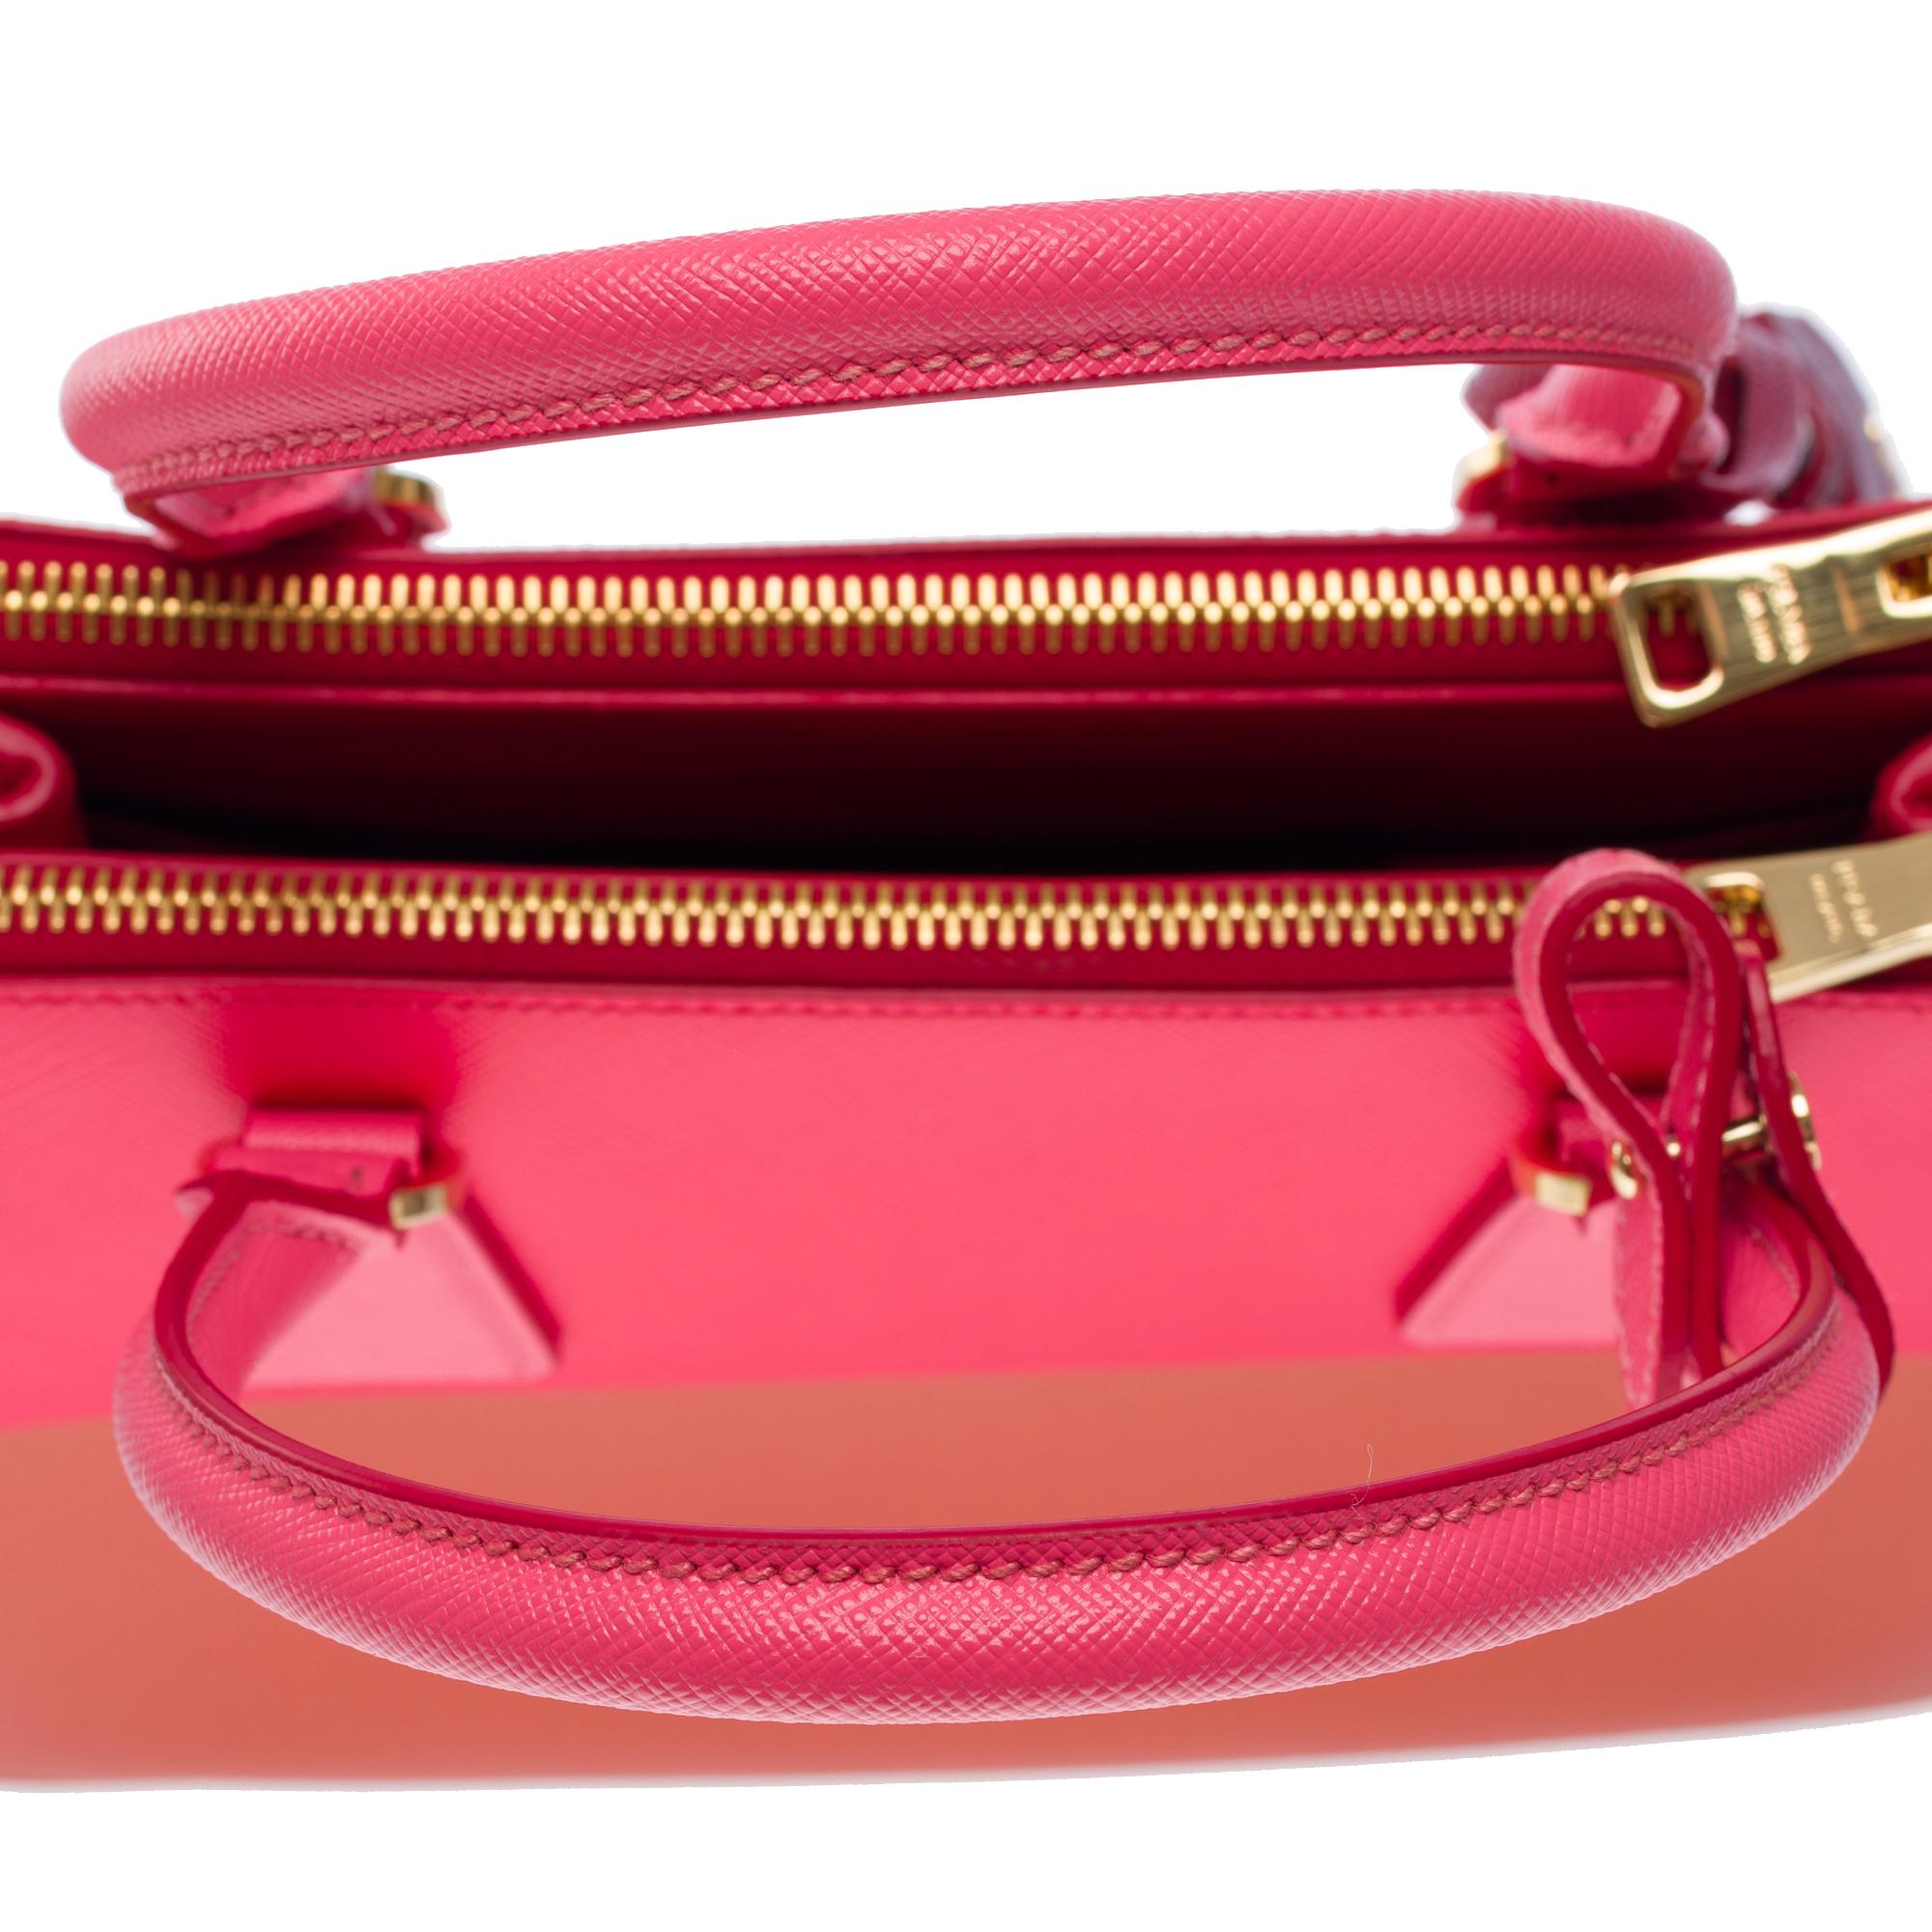 New Galleria Limited Edition handbag strap in Cooper/Strawberry leather, GHW For Sale 5